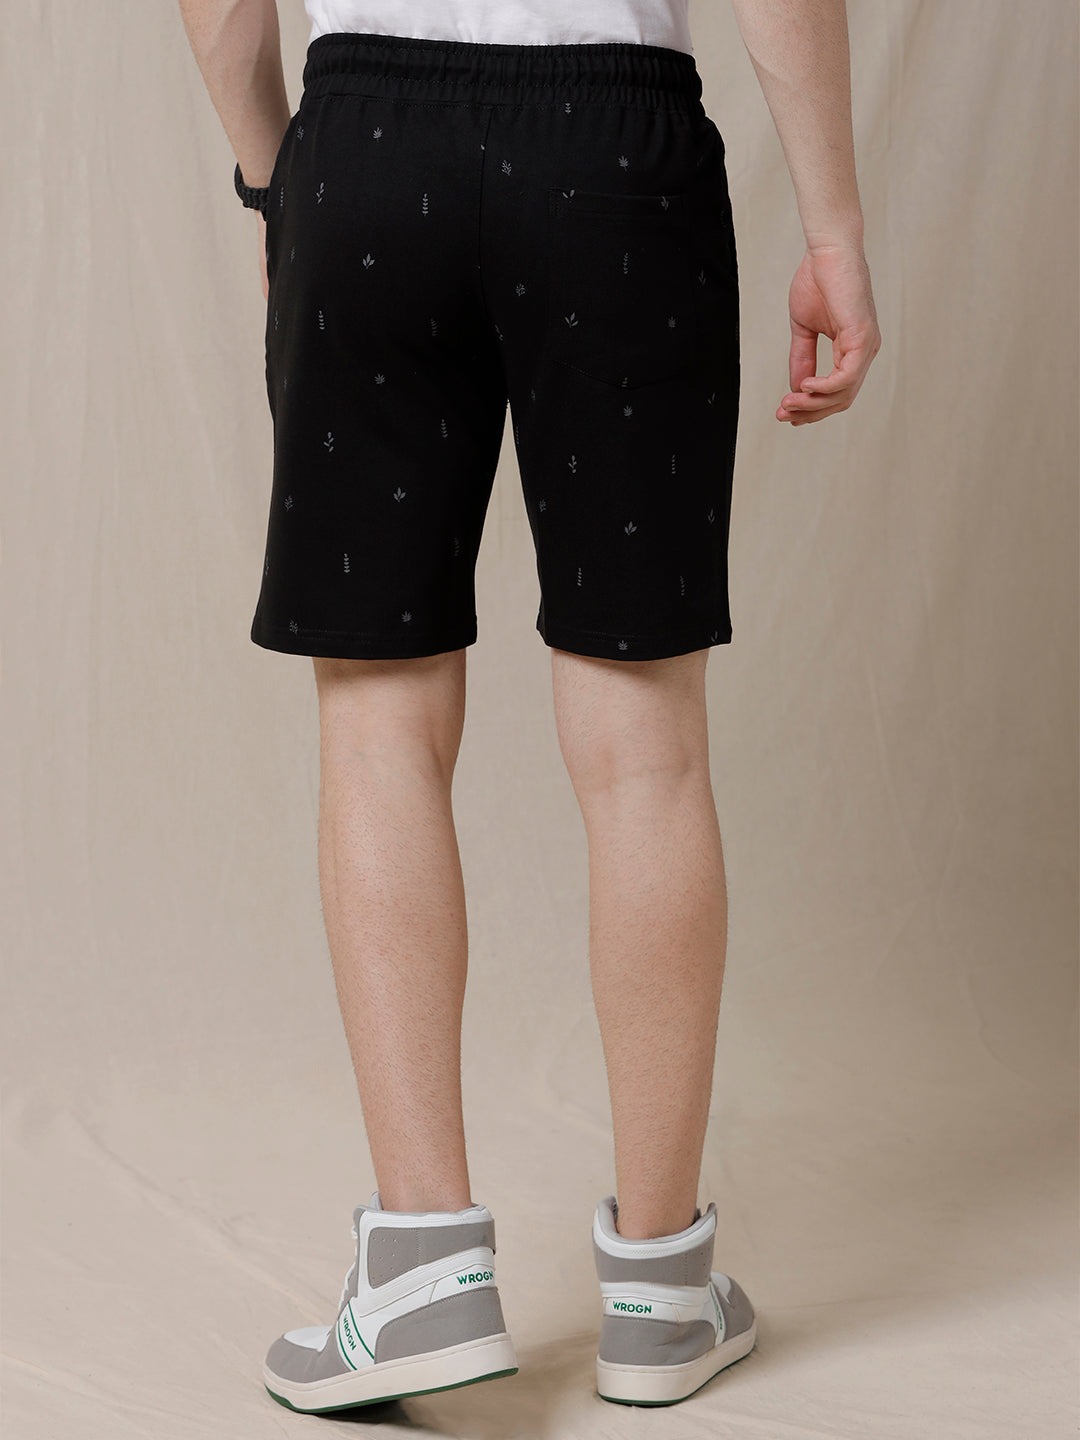 Black All Over Printed Shorts